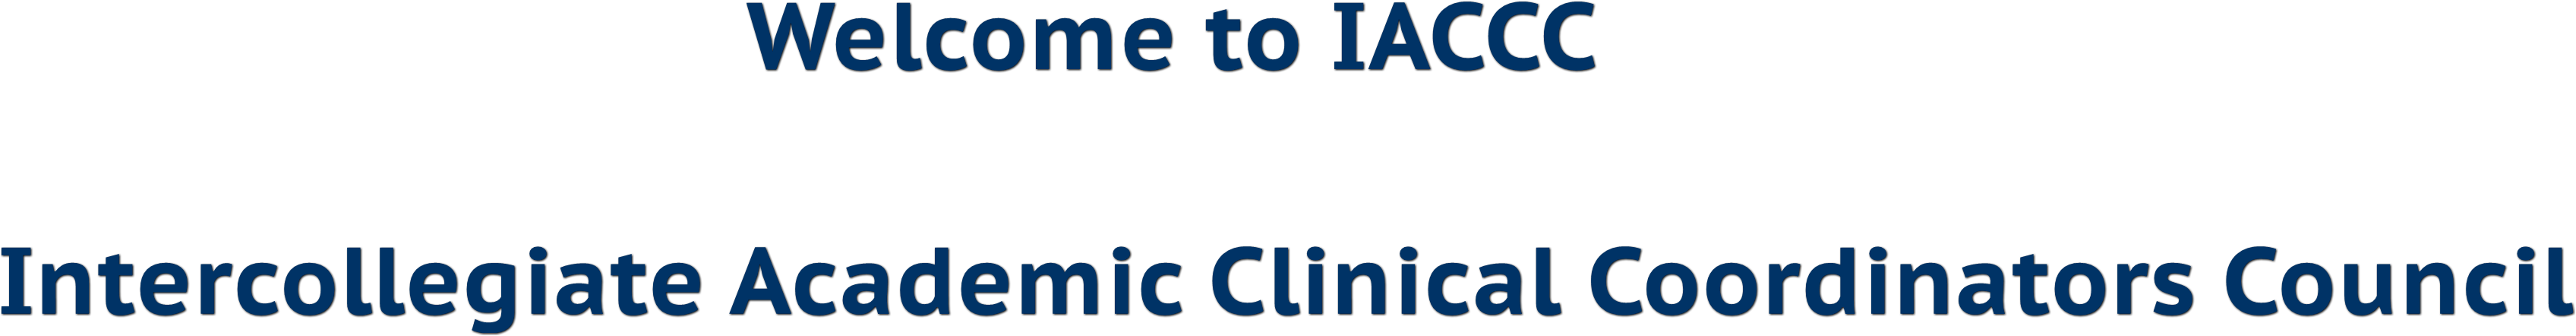 Welcome to IACCC                                   

                          Intercollegiate Academic Clinical Coordinators Council